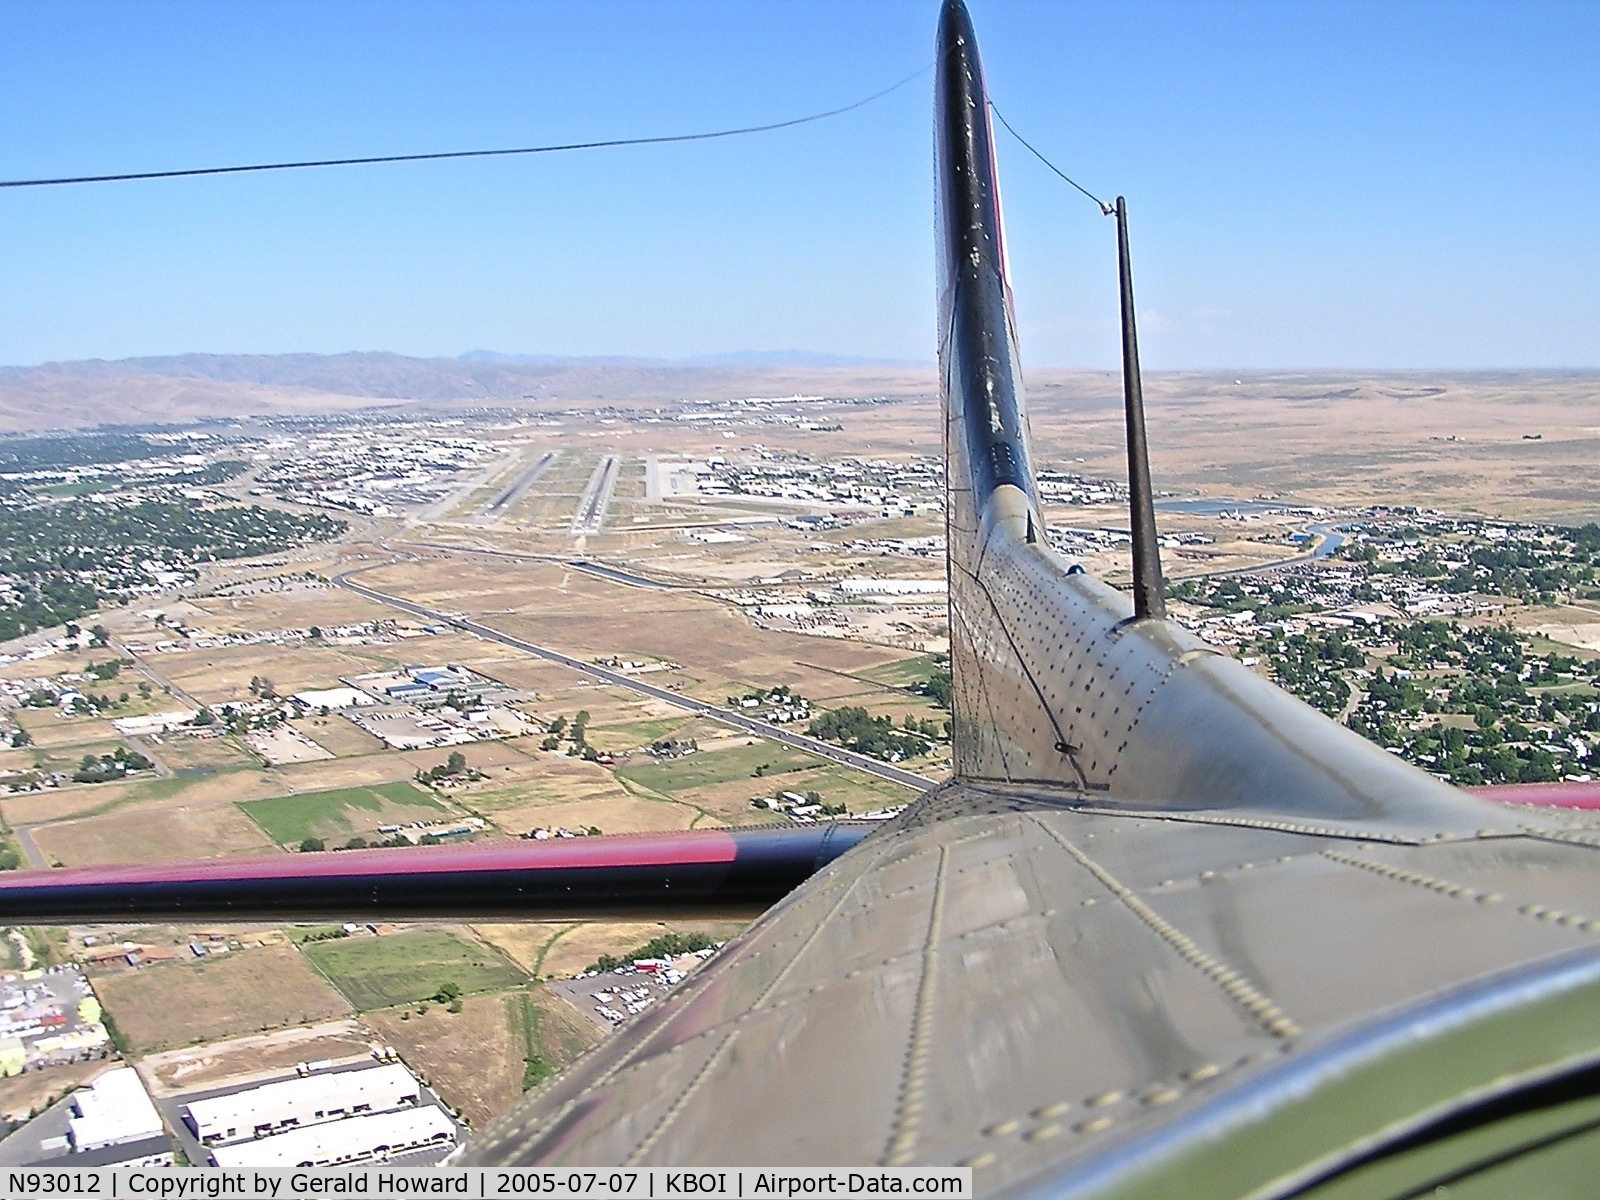 N93012, 1944 Boeing B-17G-30-BO Flying Fortress C/N 32264, Looking out of the radio operator's window after take off from KBOI.